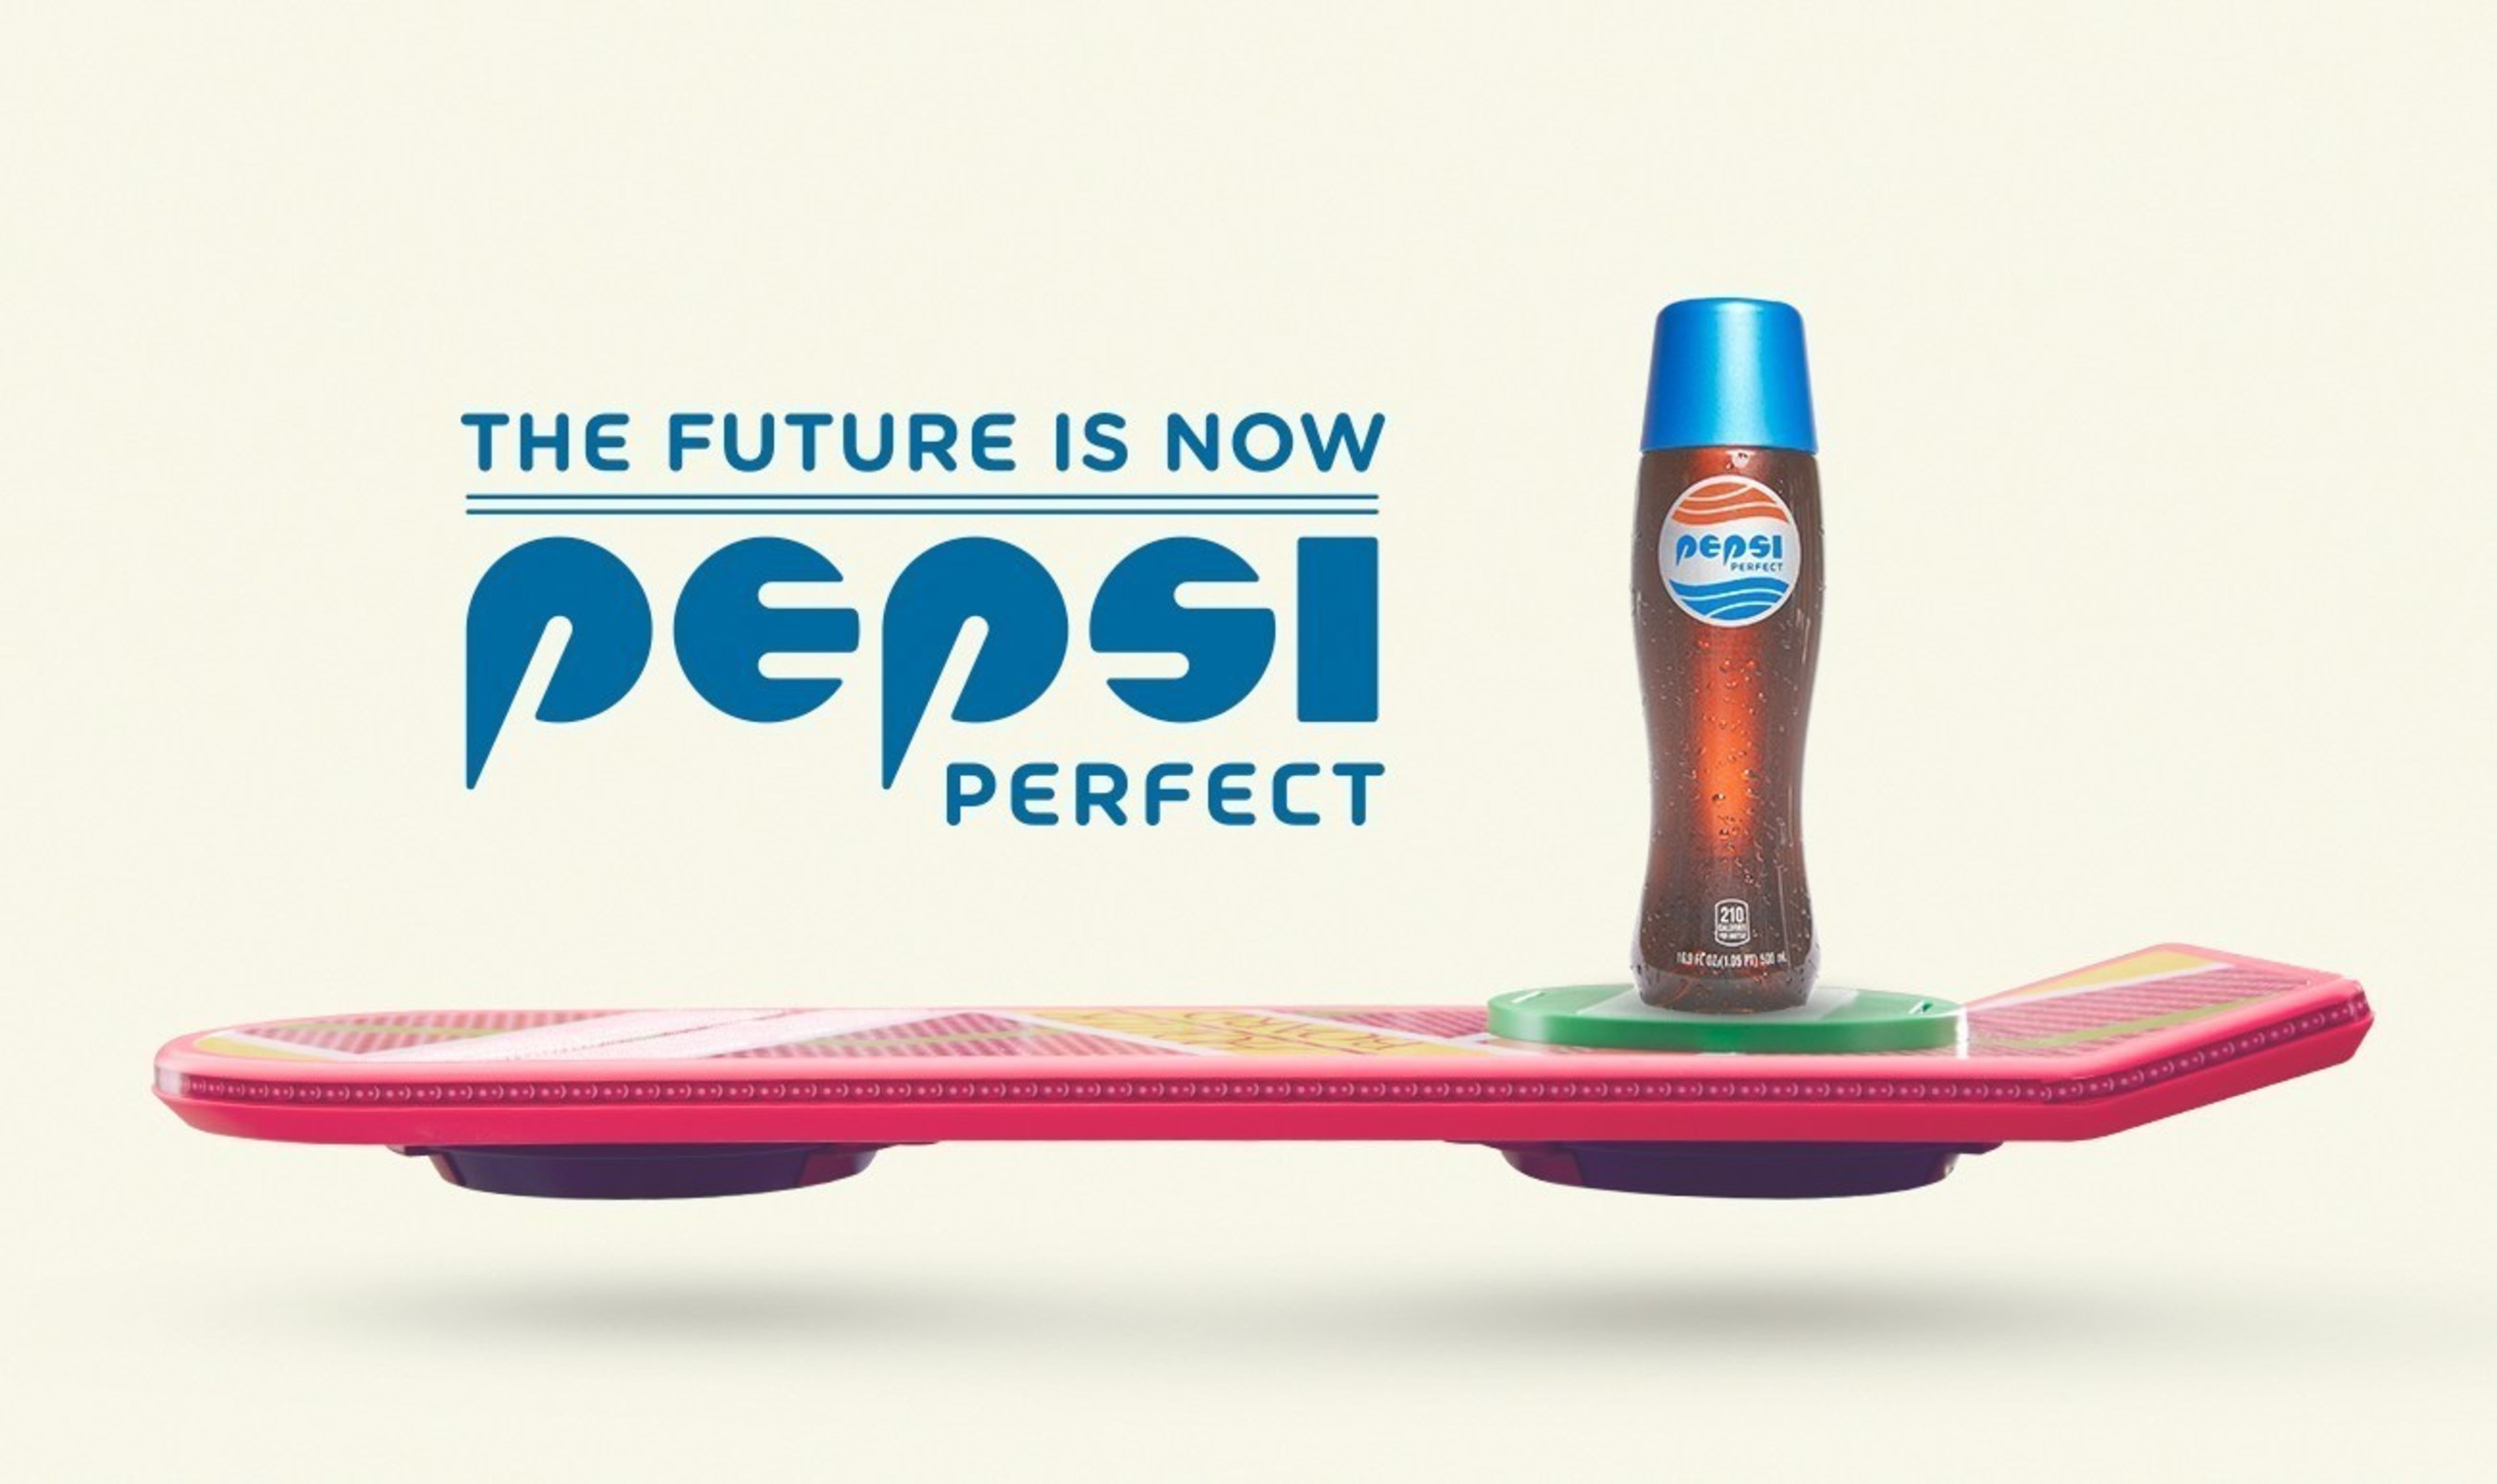 Pepsi unveils a series of themed advertisements in celebration of Pepsi Perfect and the 30th anniversary of Back to the Future.